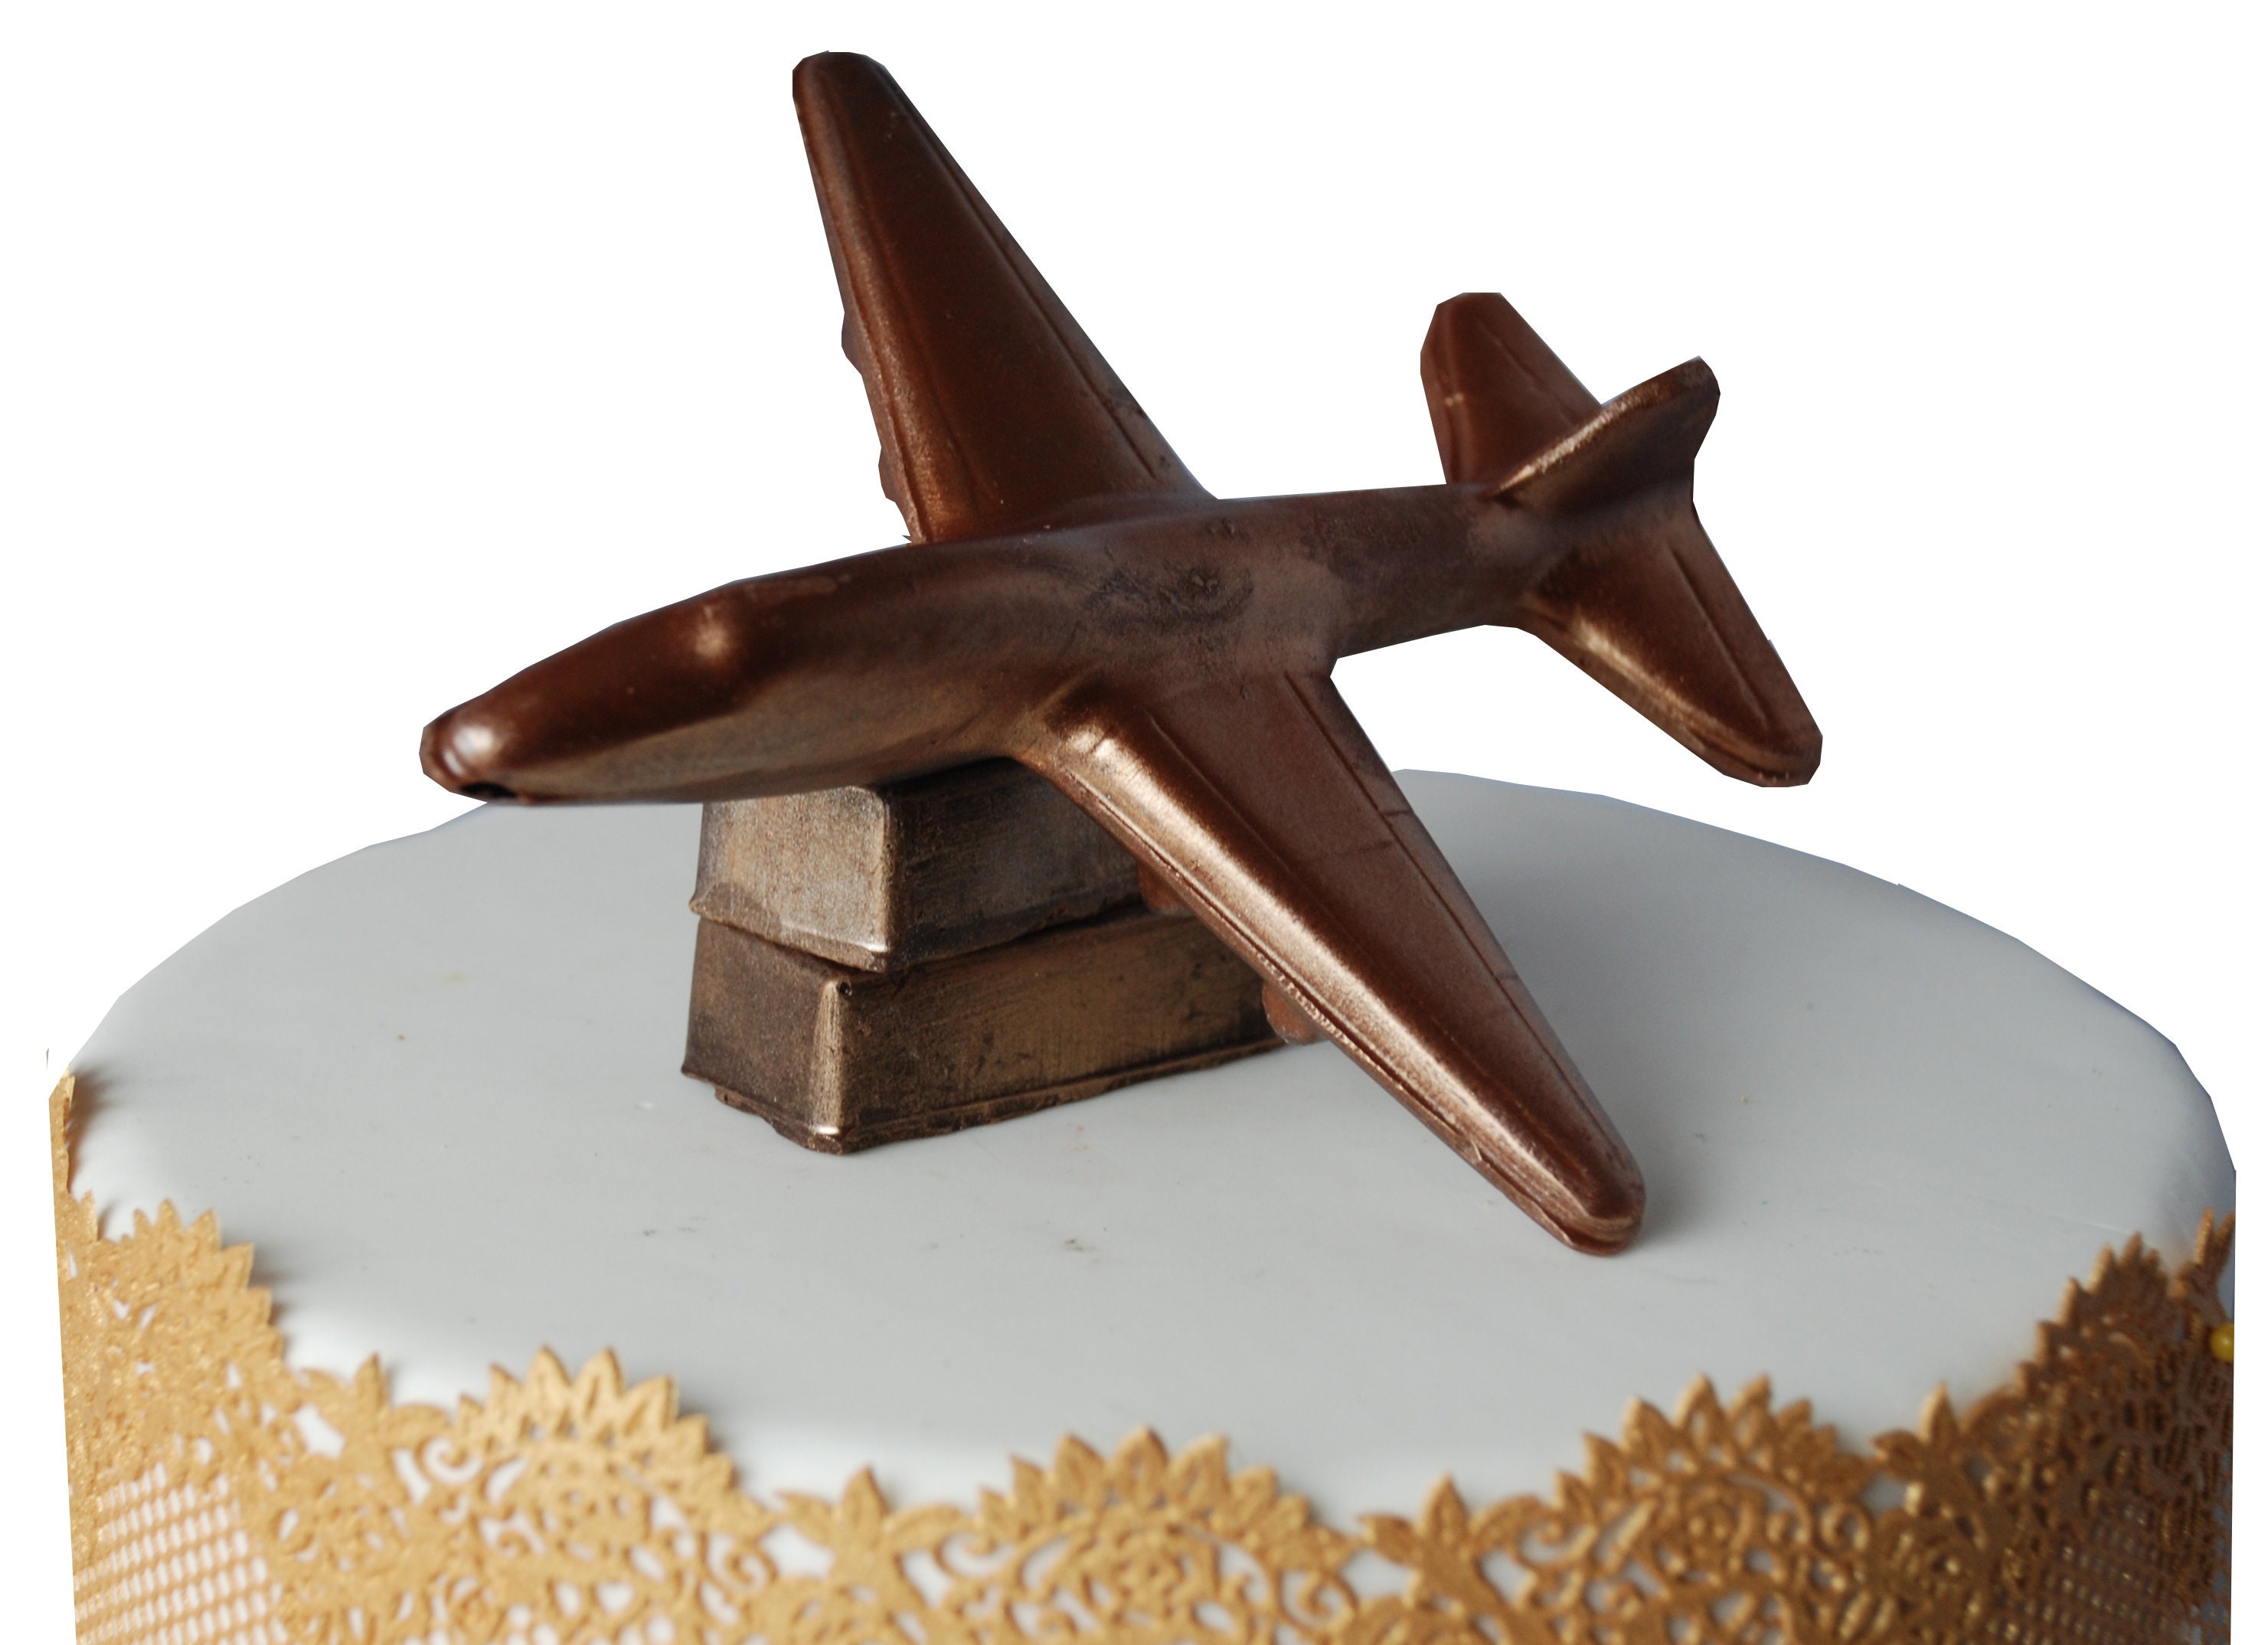 8 different planes 24 Precut Aeroplane Plane Jet Themed Edible Wafer Paper Cake Toppers Decorations 